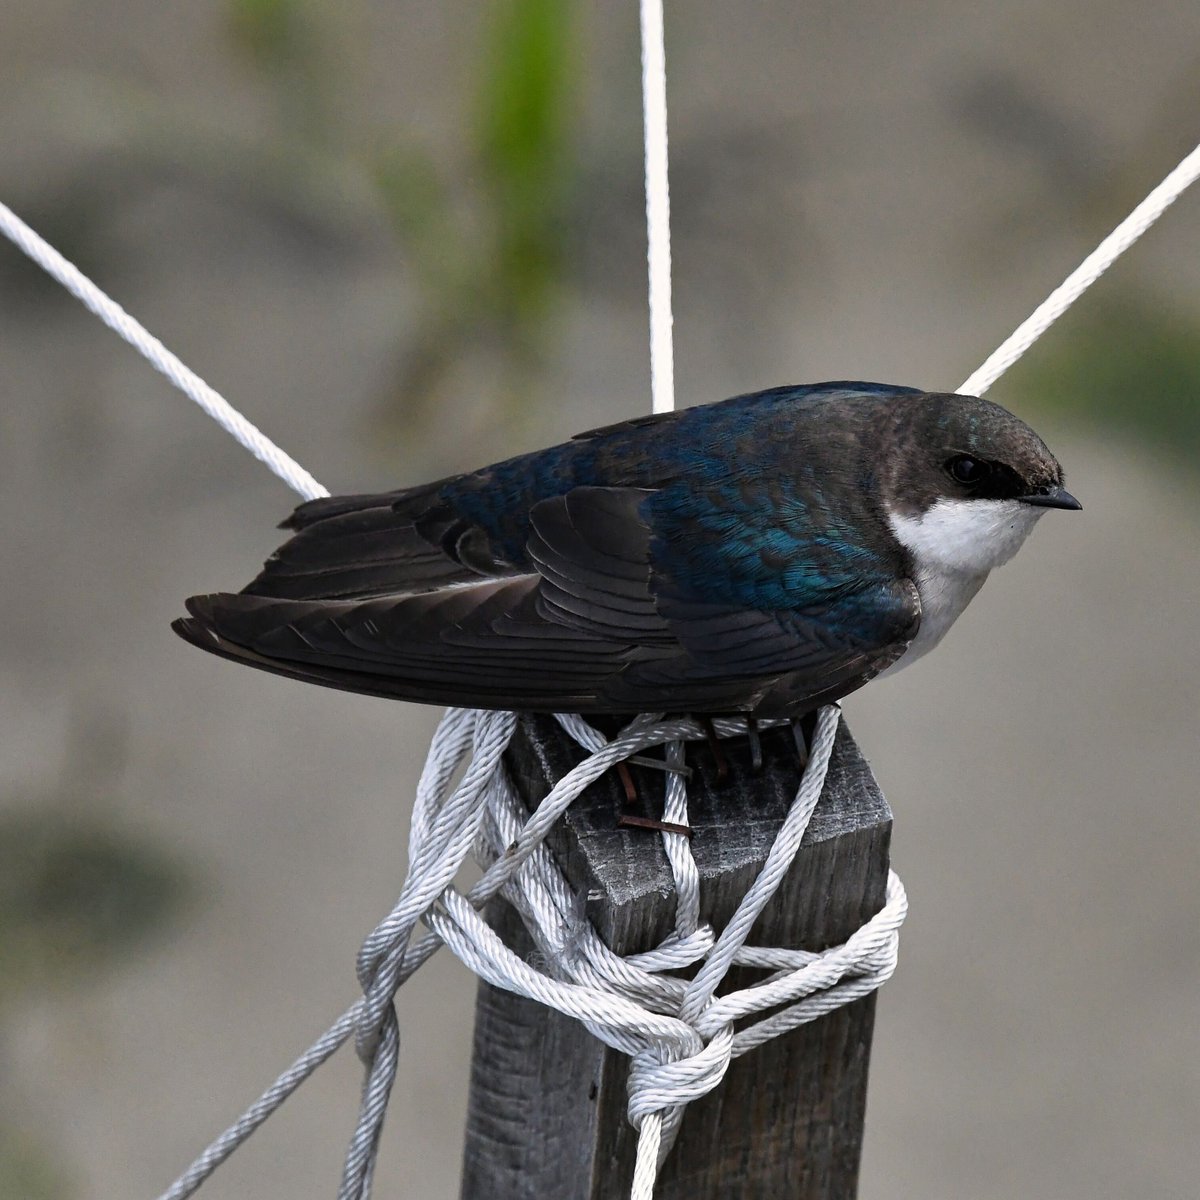 Tree Swallow seen at Sunset Cove Park along Jamaica Bay in Broad Channel today.